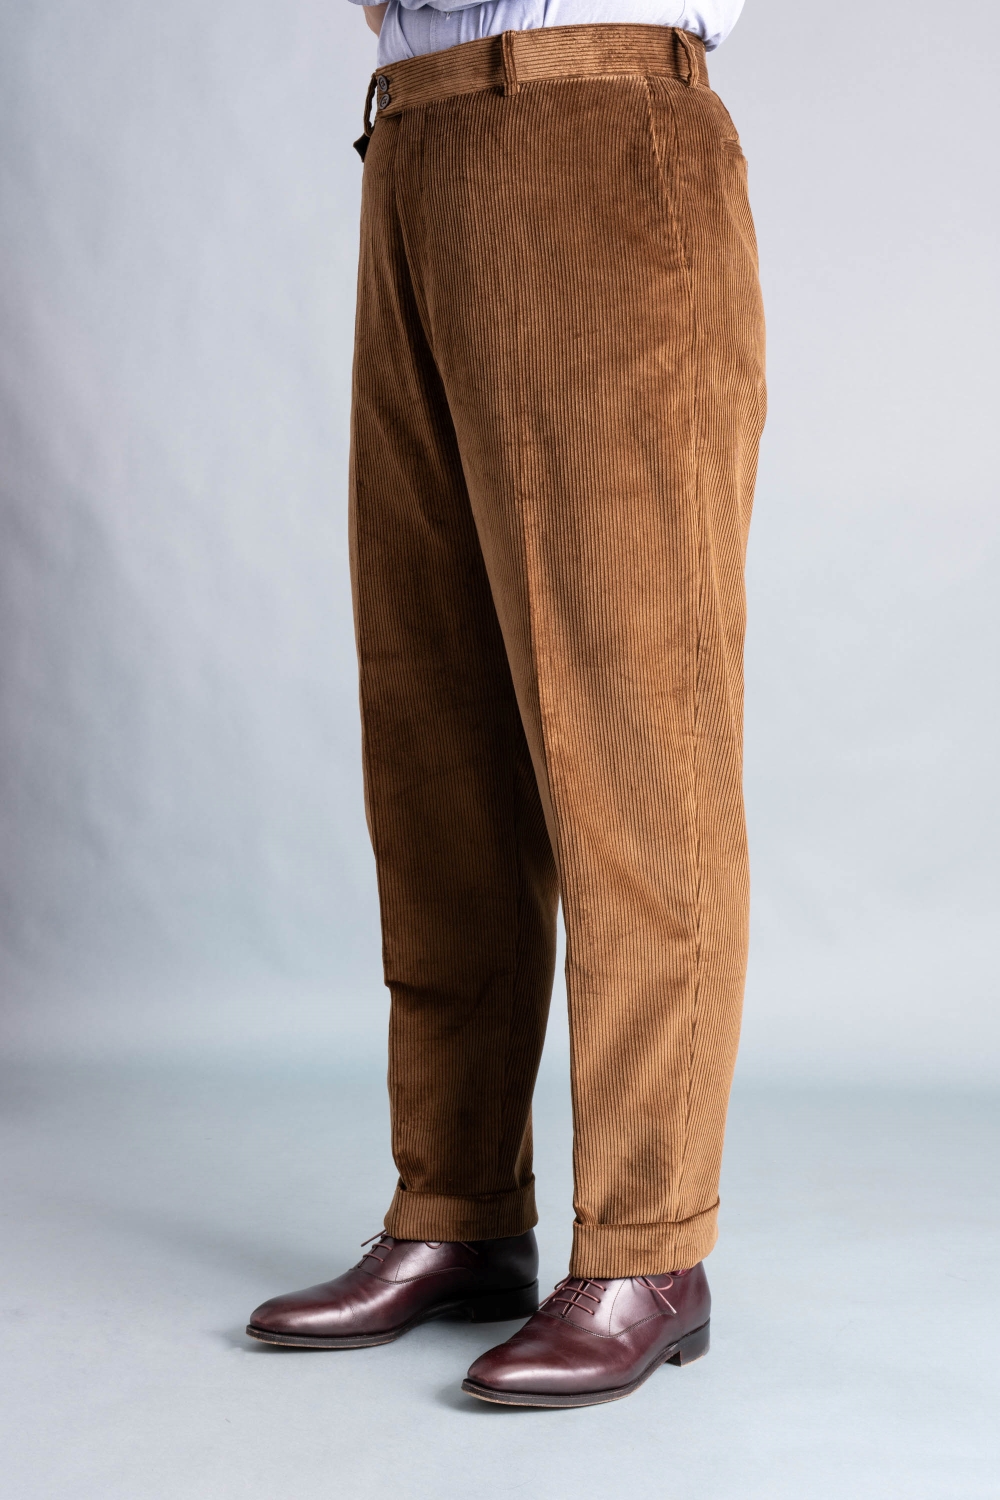 Focused Stancliffe Corduroy Flat Front Trouser in Cognac